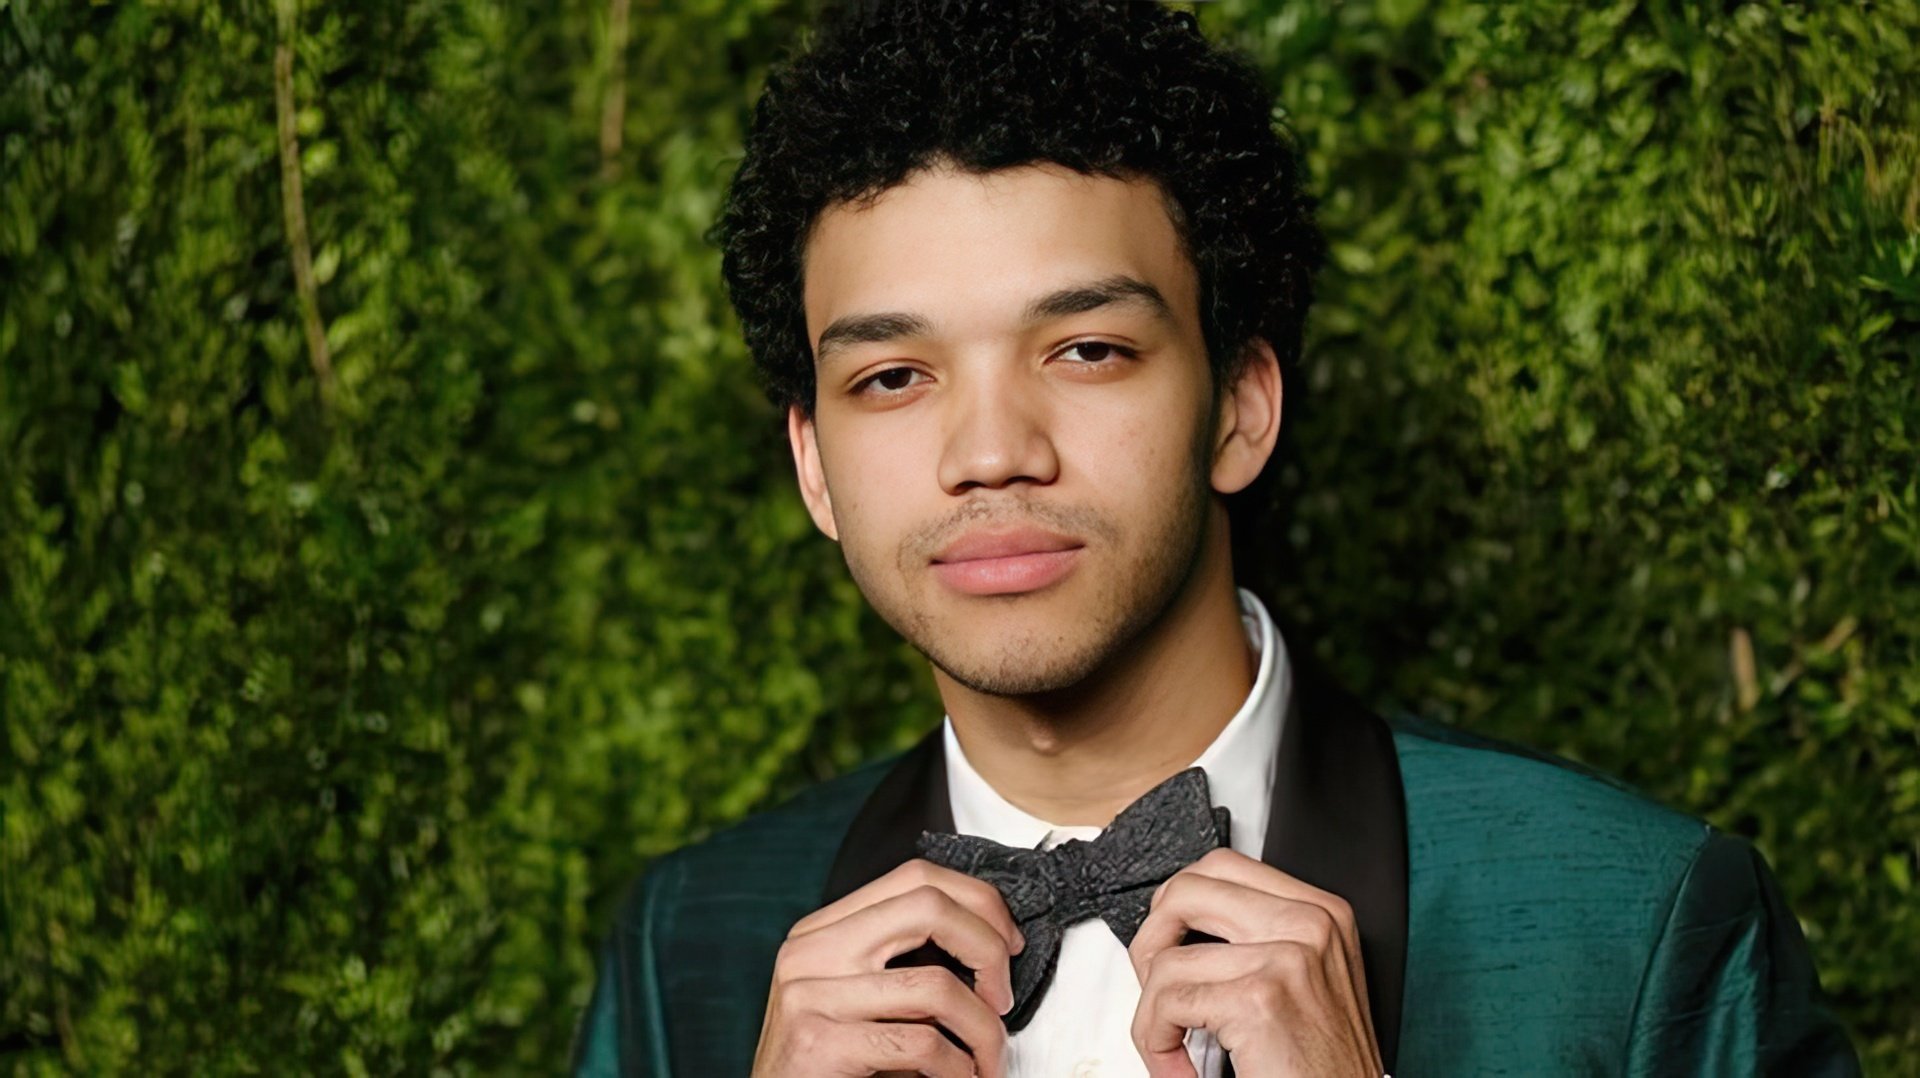 In the photo: Justice Smith